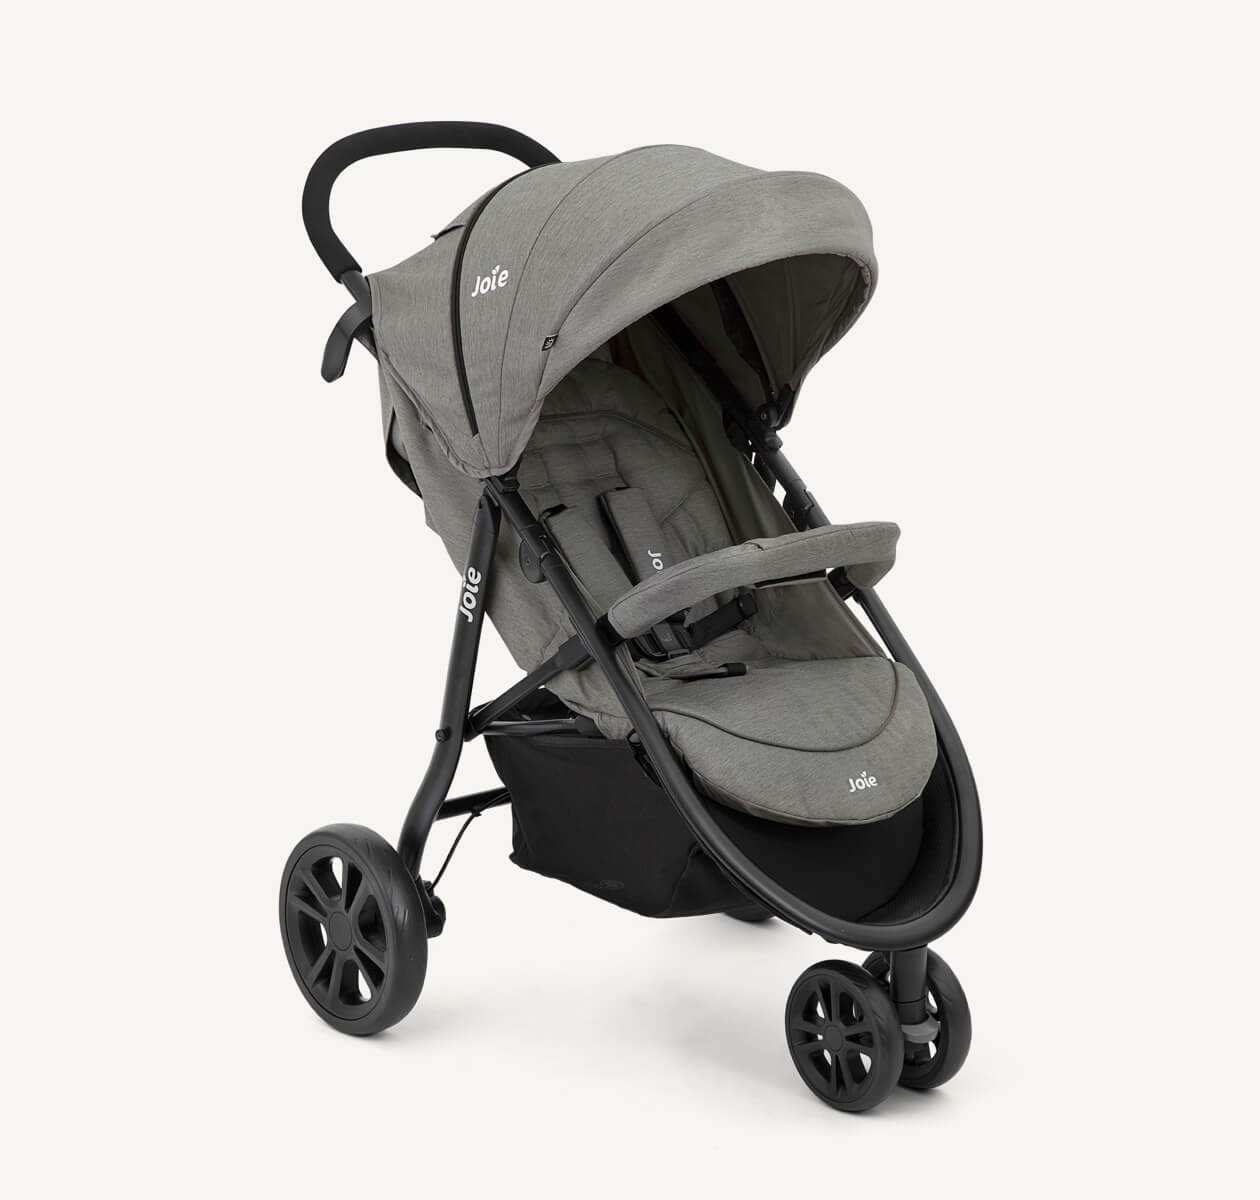 Joie litetrax 3 stroller in gray at an angle.